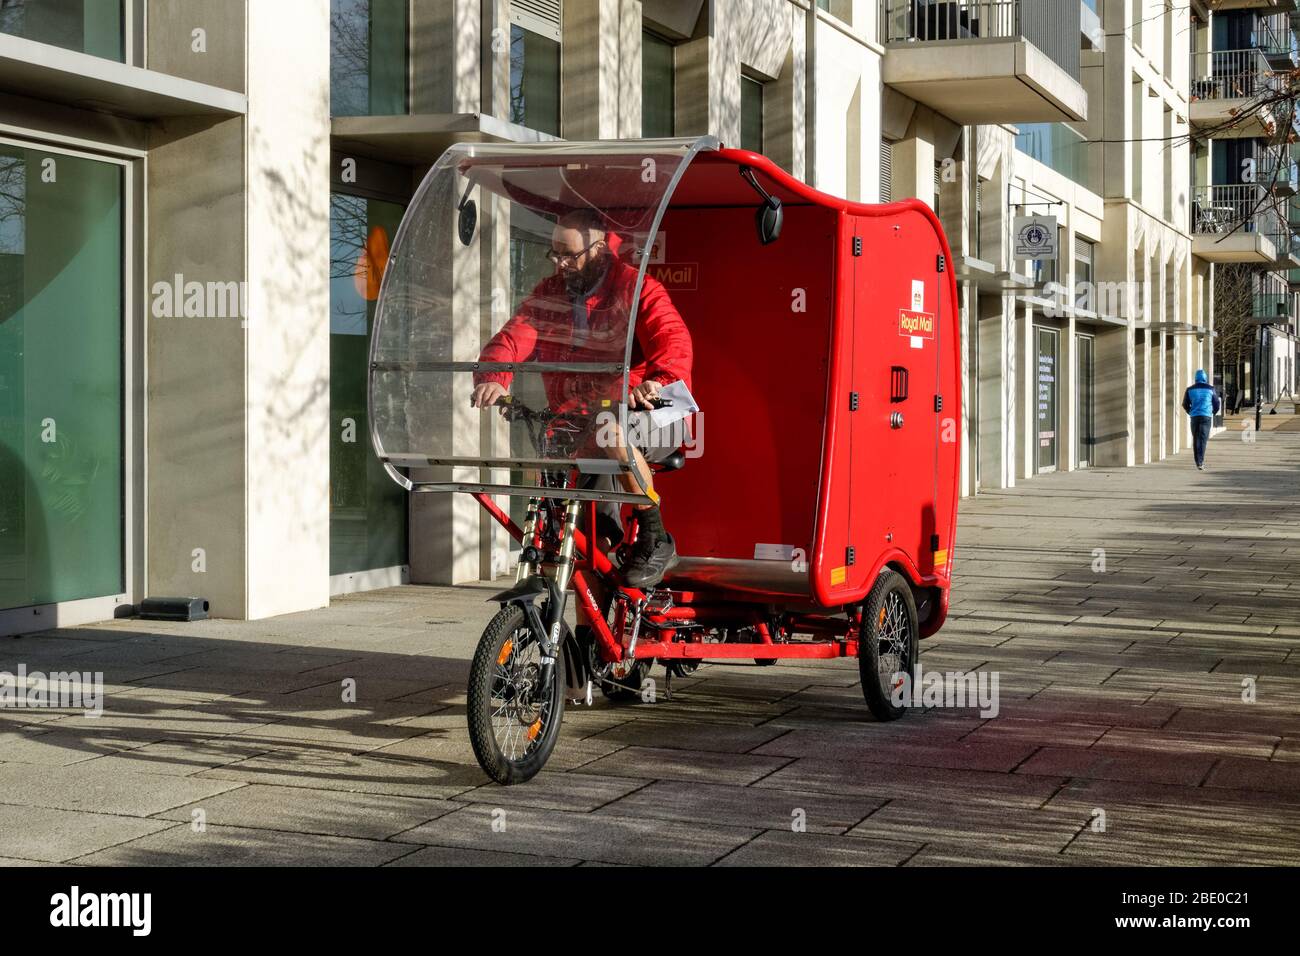 Cycling Royal Mail postman on electric cargo bike, e-Trike, powered by a combination of solar, battery, pedal and brake technology Stratford London UK Stock Photo